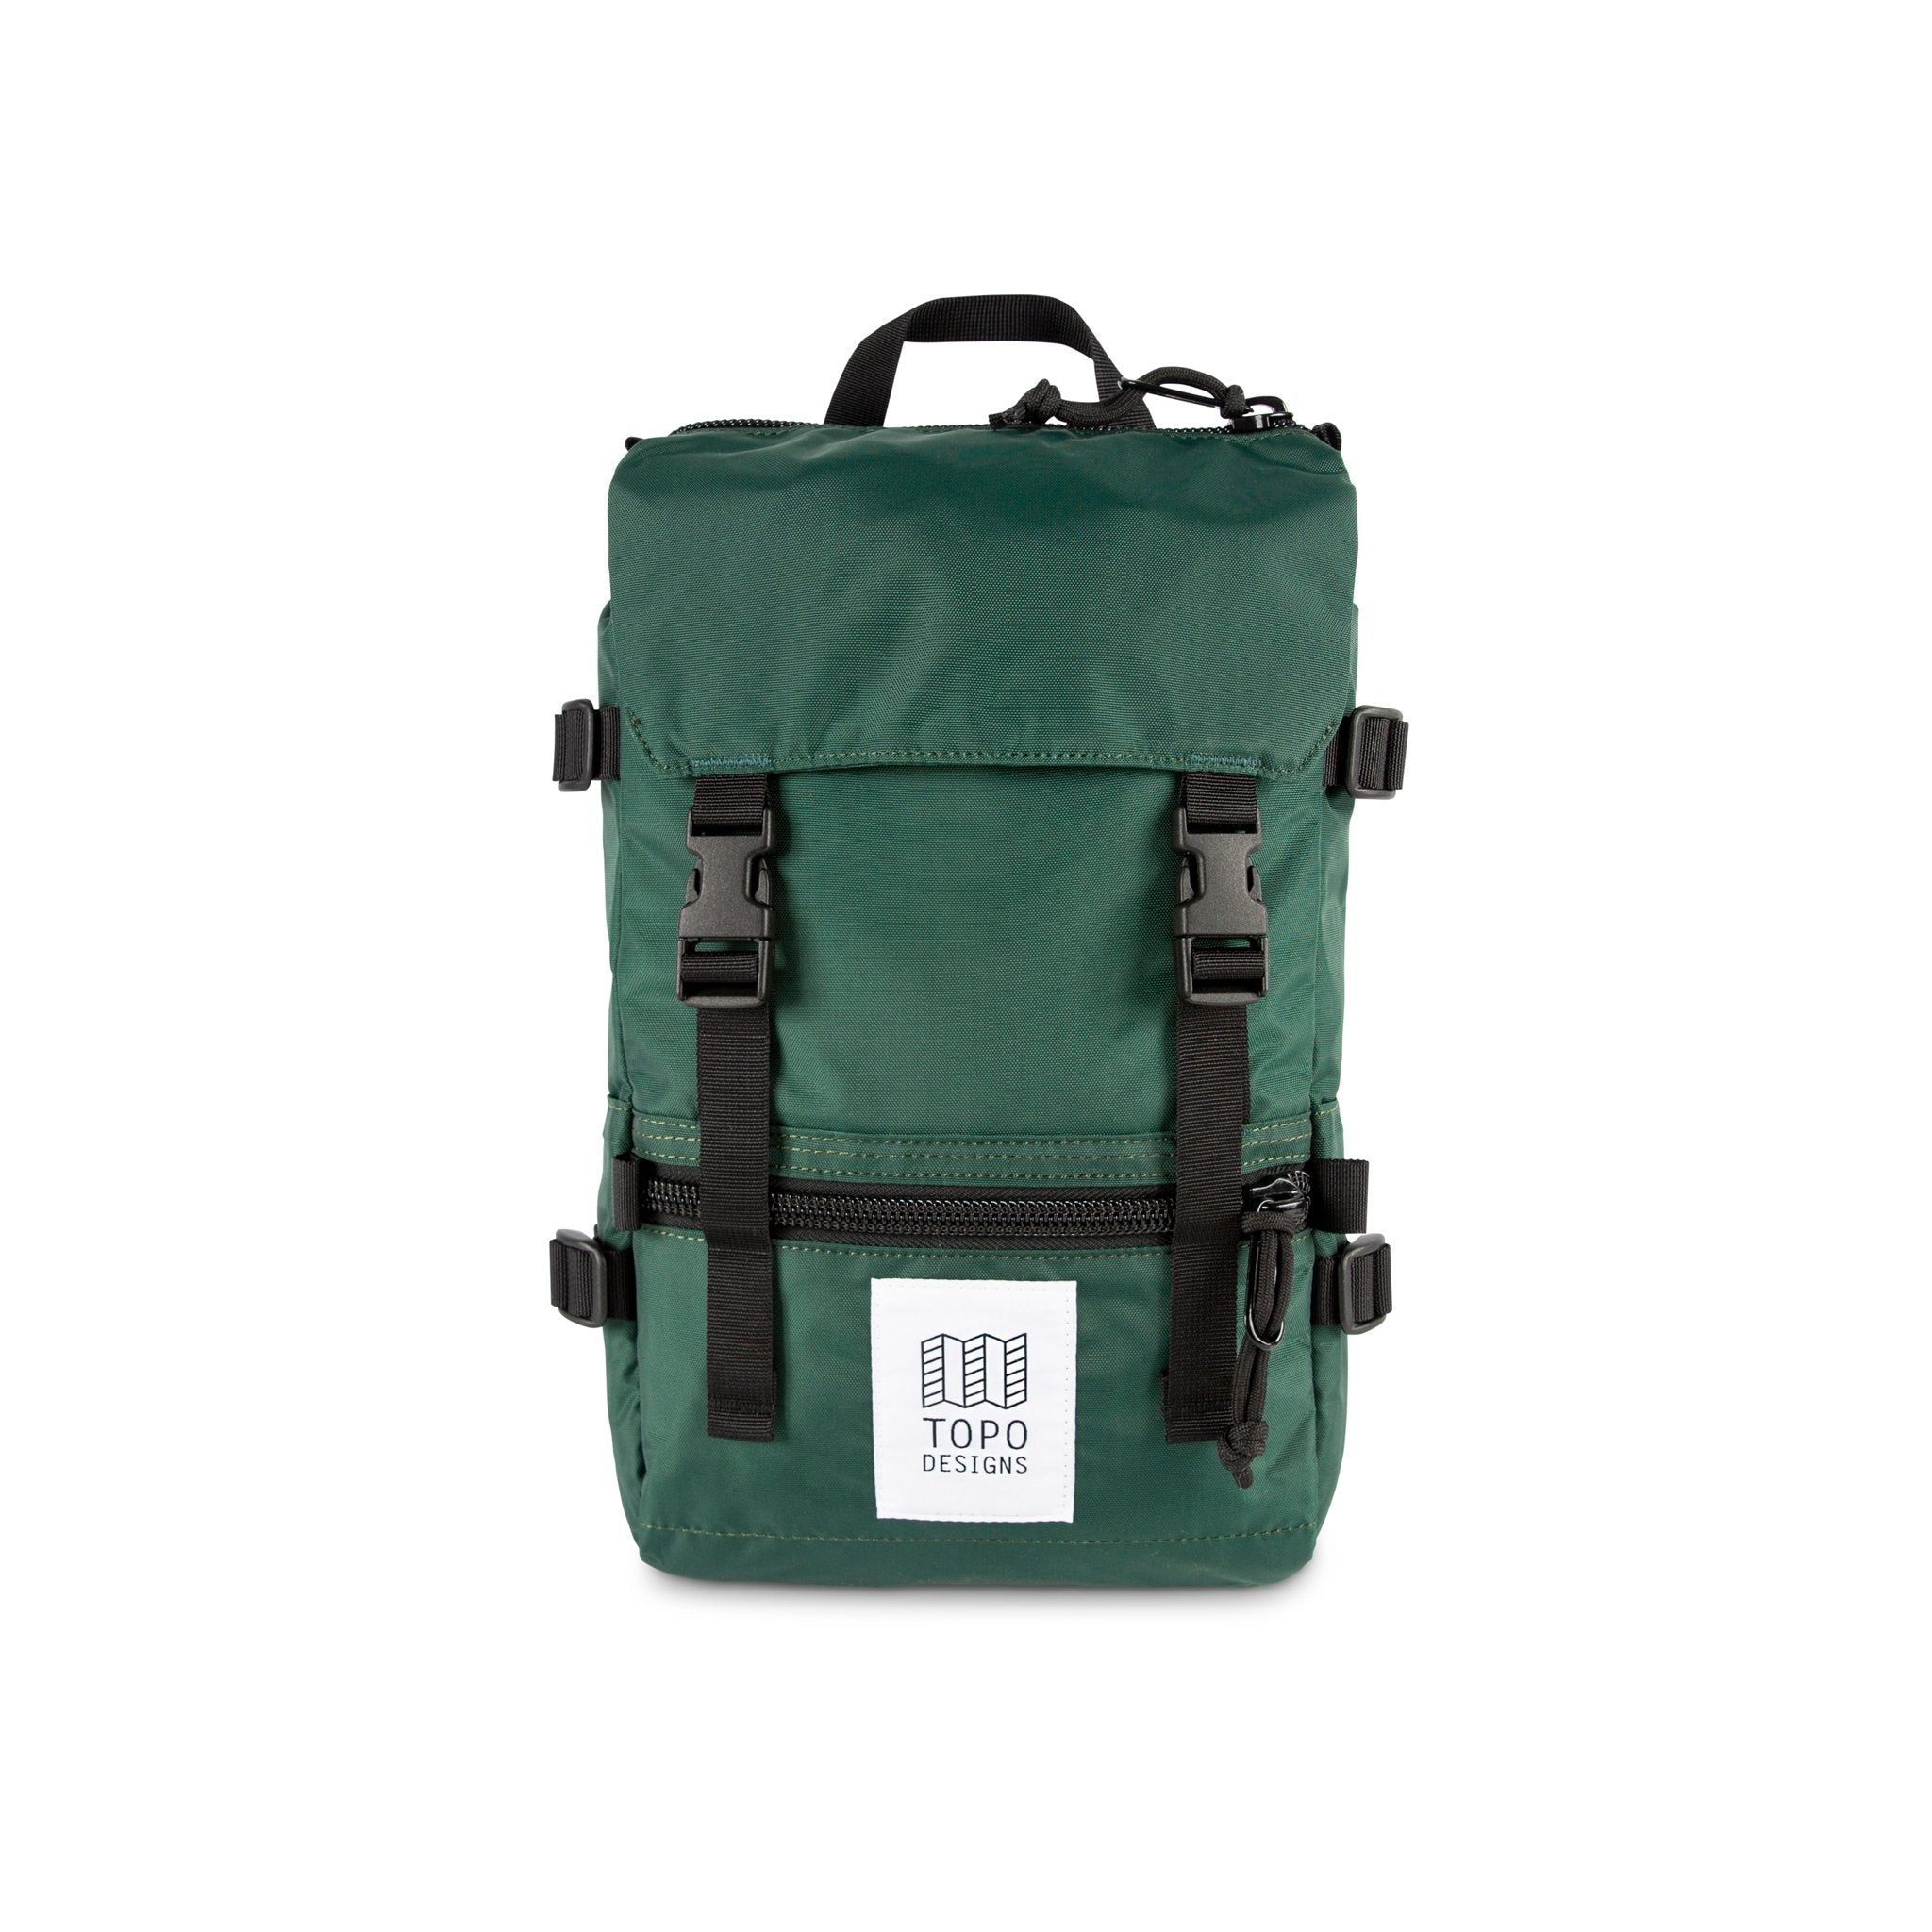 Topo Designs Rover Pack Mini backpack in "Forest" green.